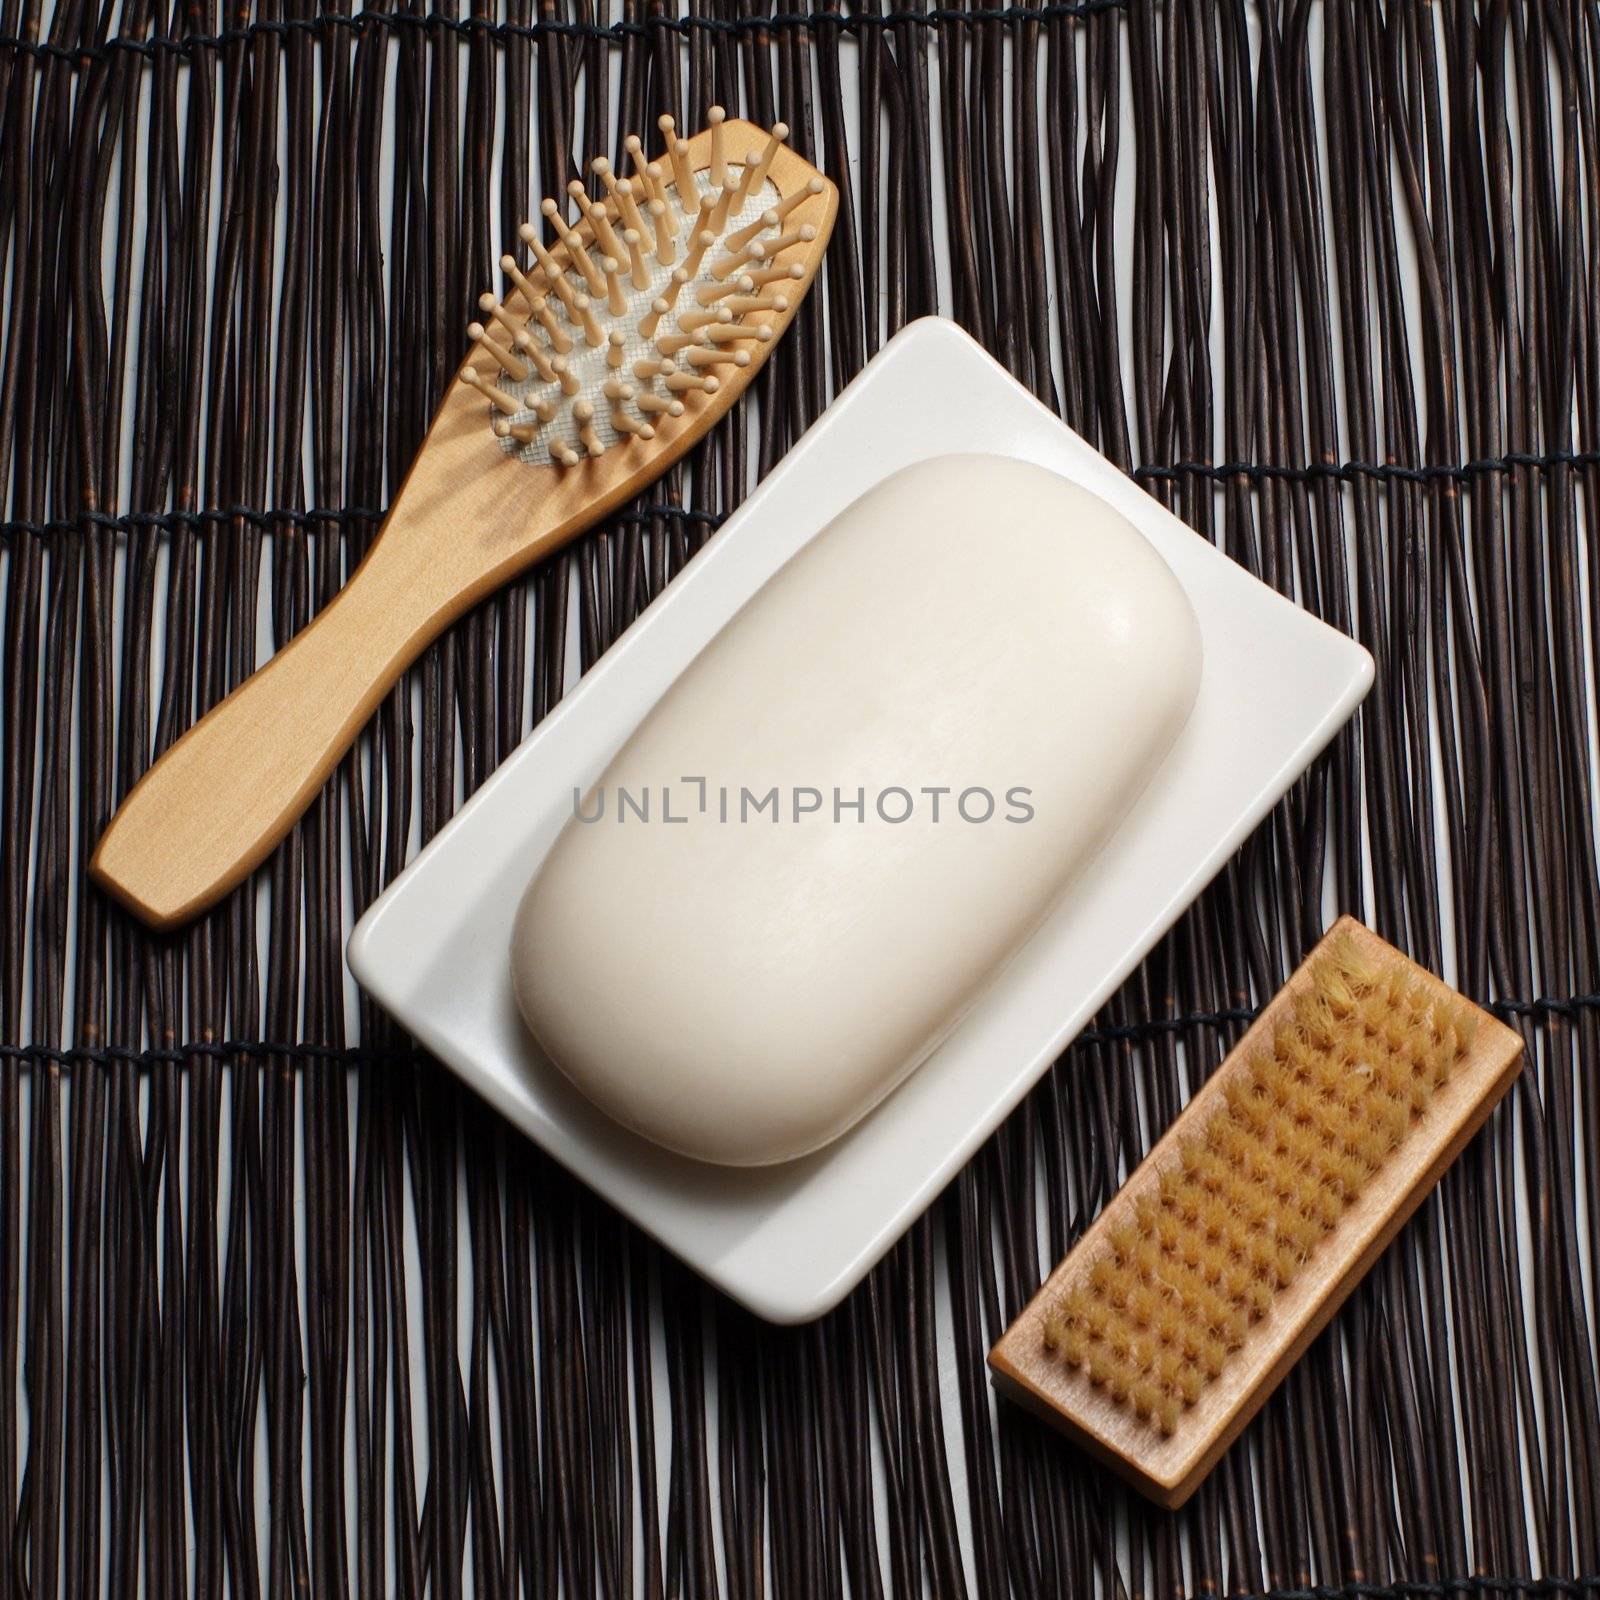 Decorative soap display on a bamboo mat.